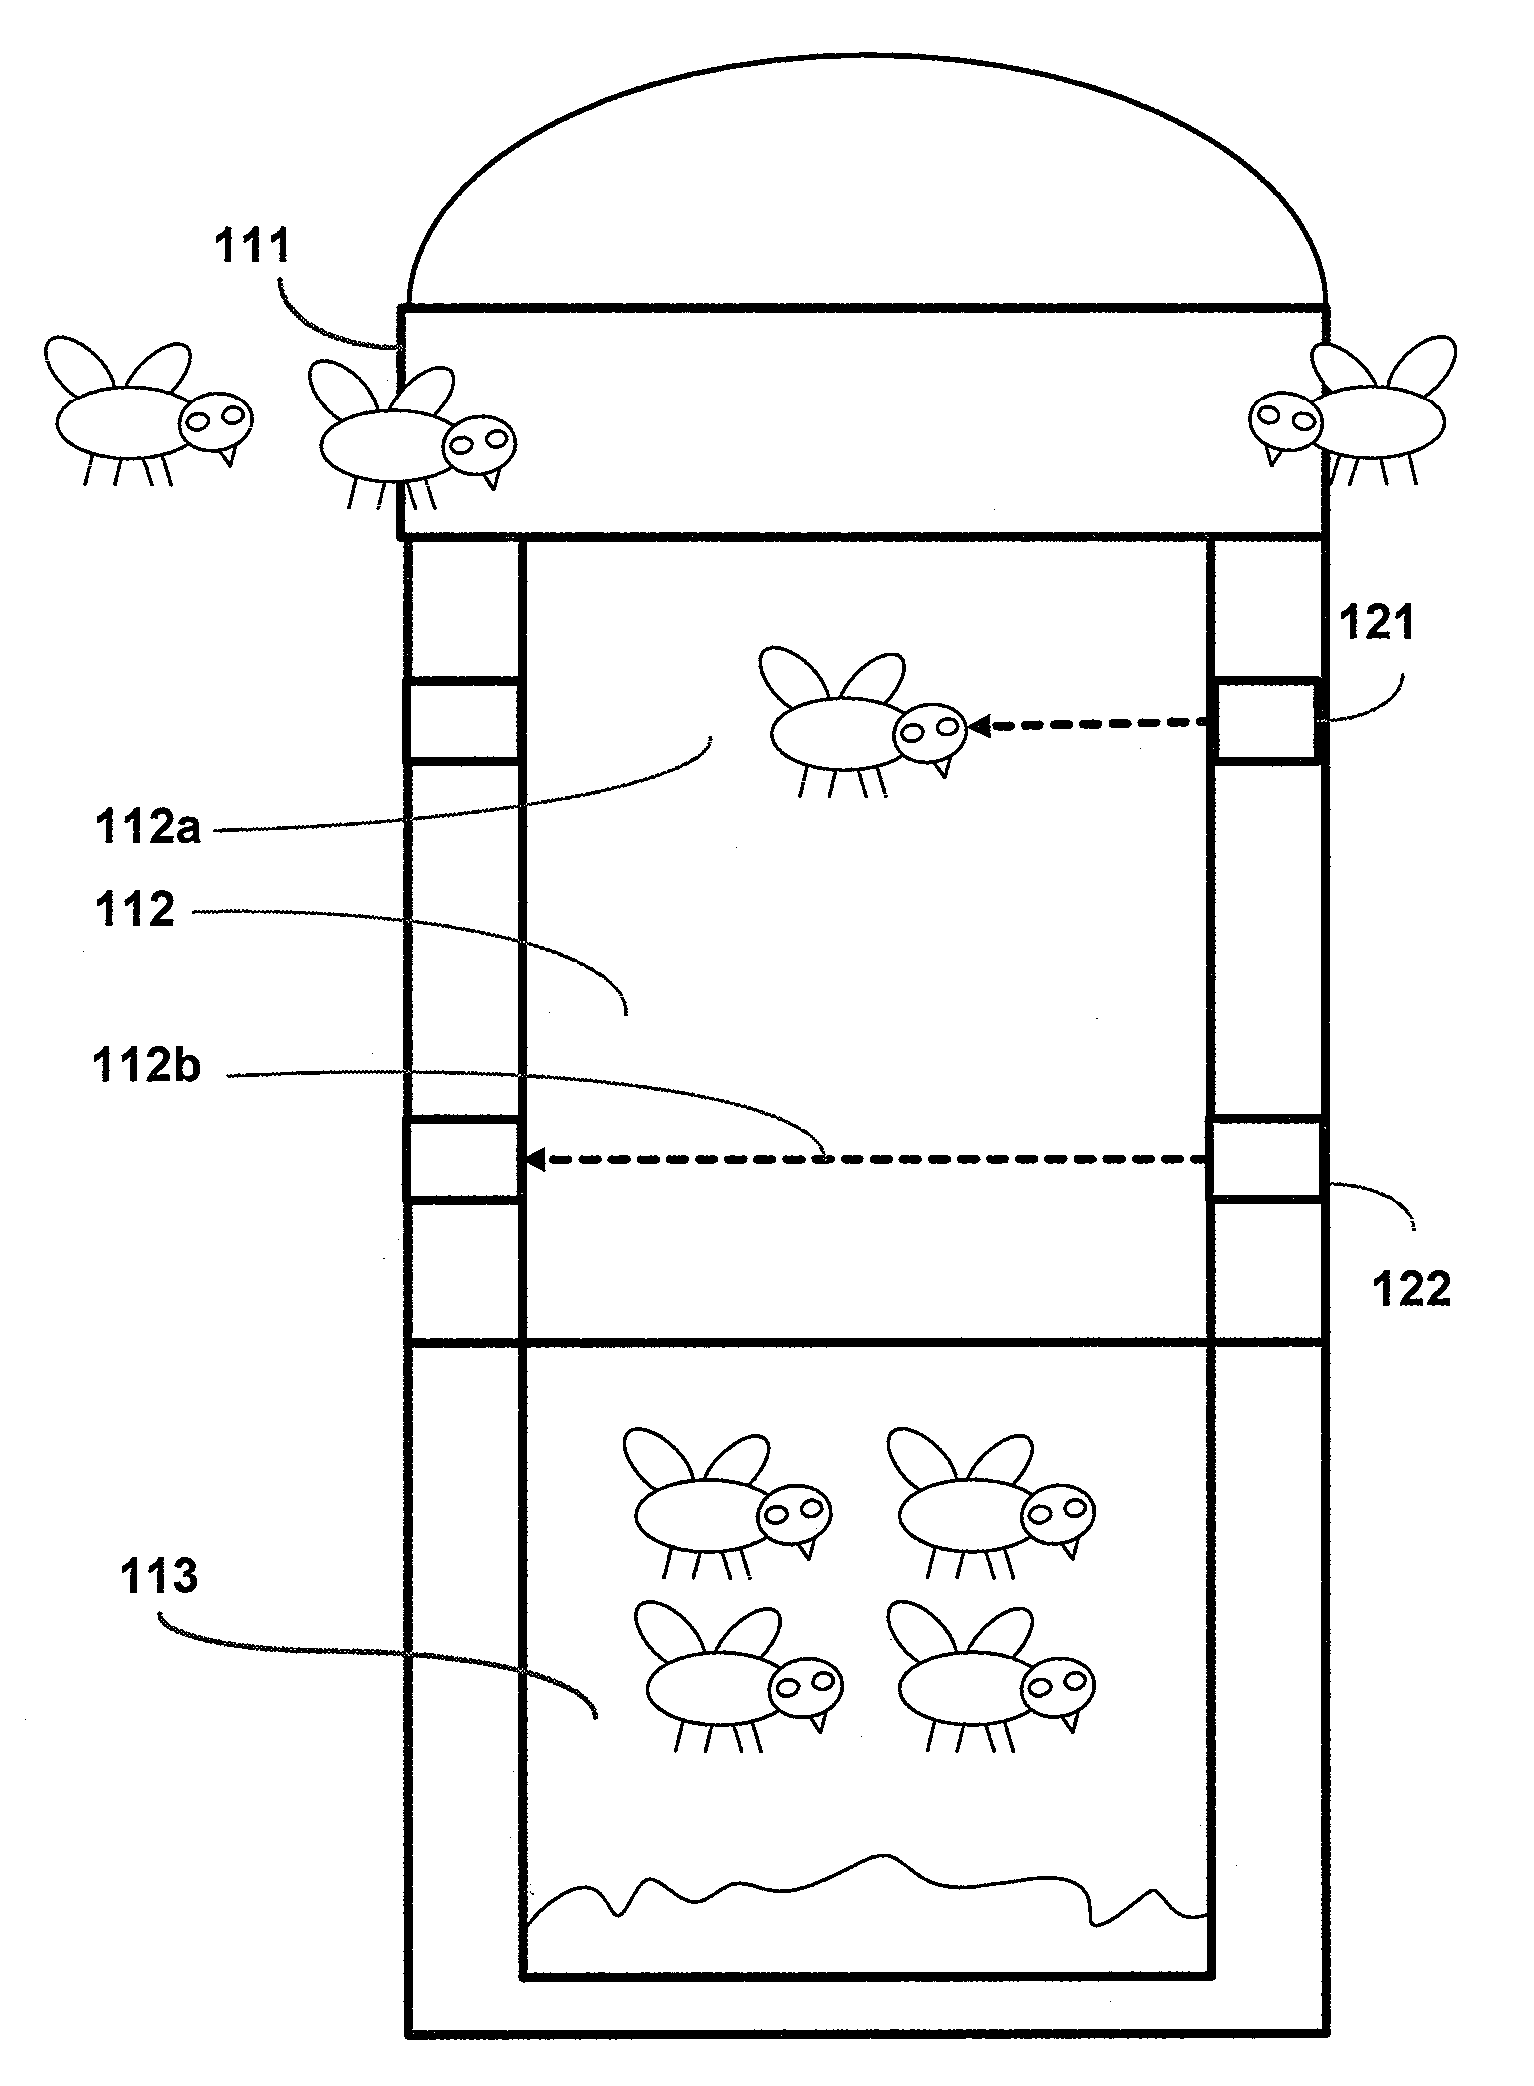 Multi-checkpoint type clustered animal counting device